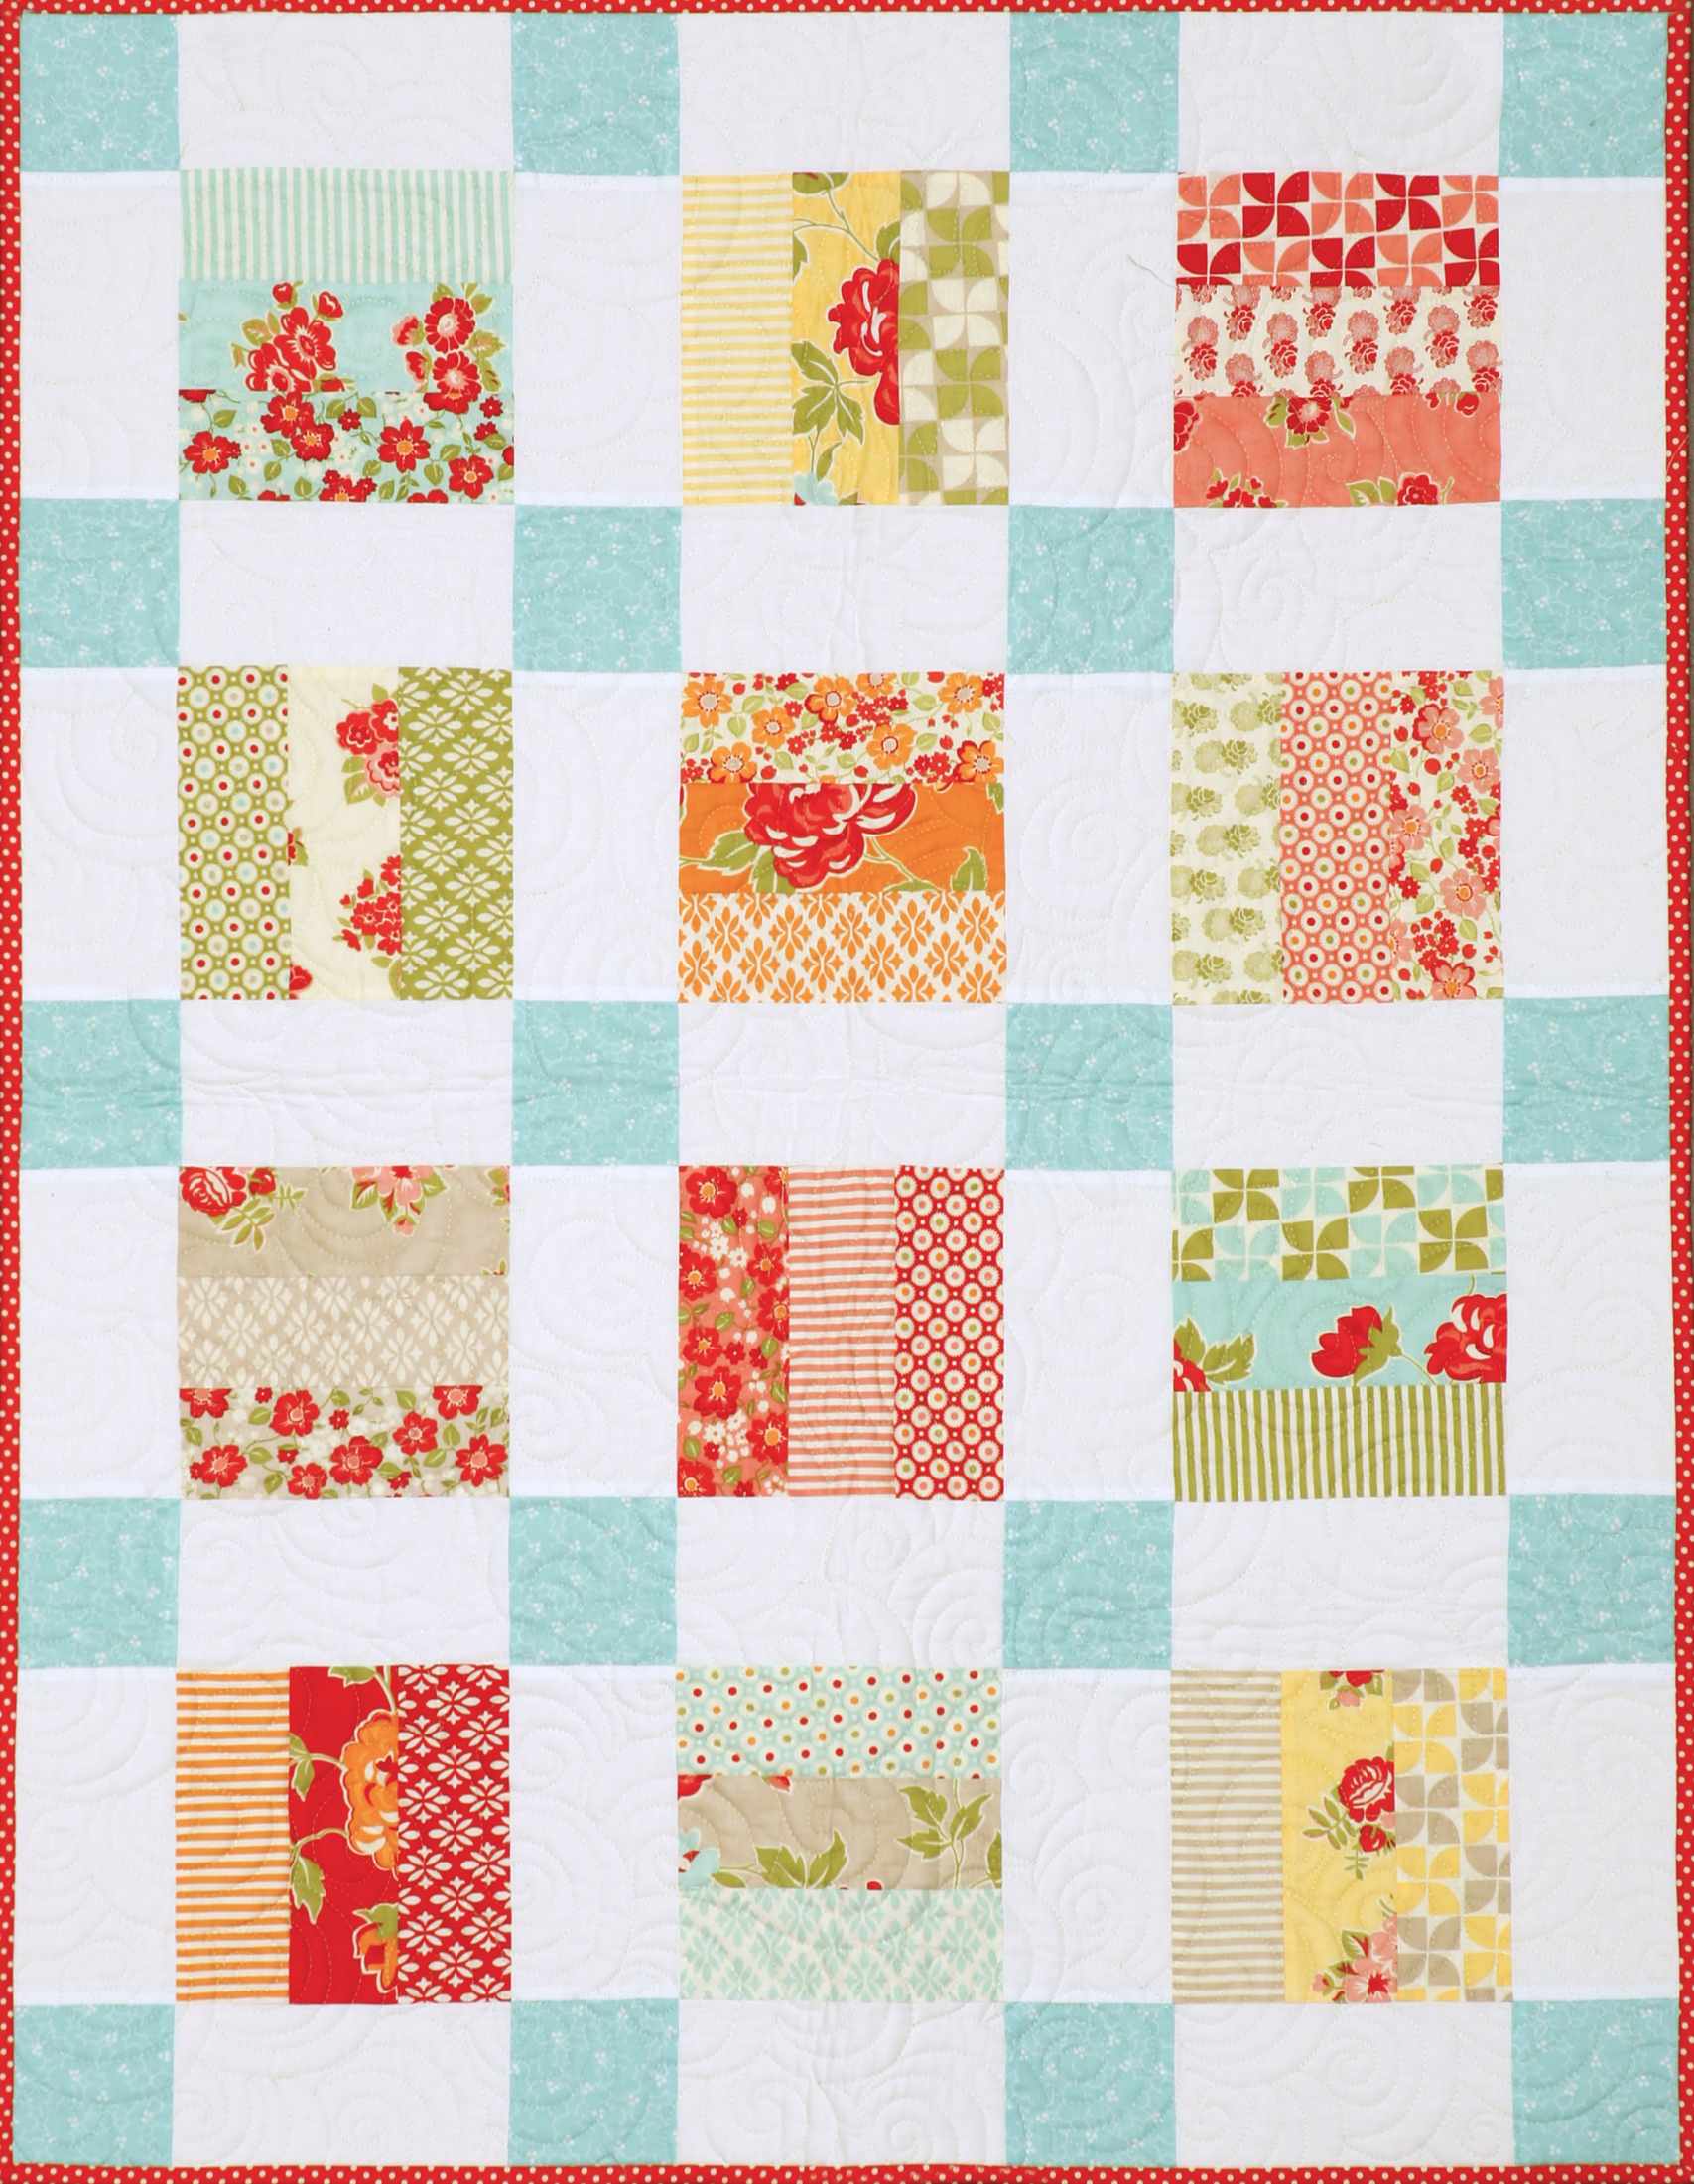 Baby Quilt Pattern PDF Download. Using jelly roll strips or 2 1/2" strips. Suitable for Beginner quilters, easy piecing with easy to follow instructions and diagrams.